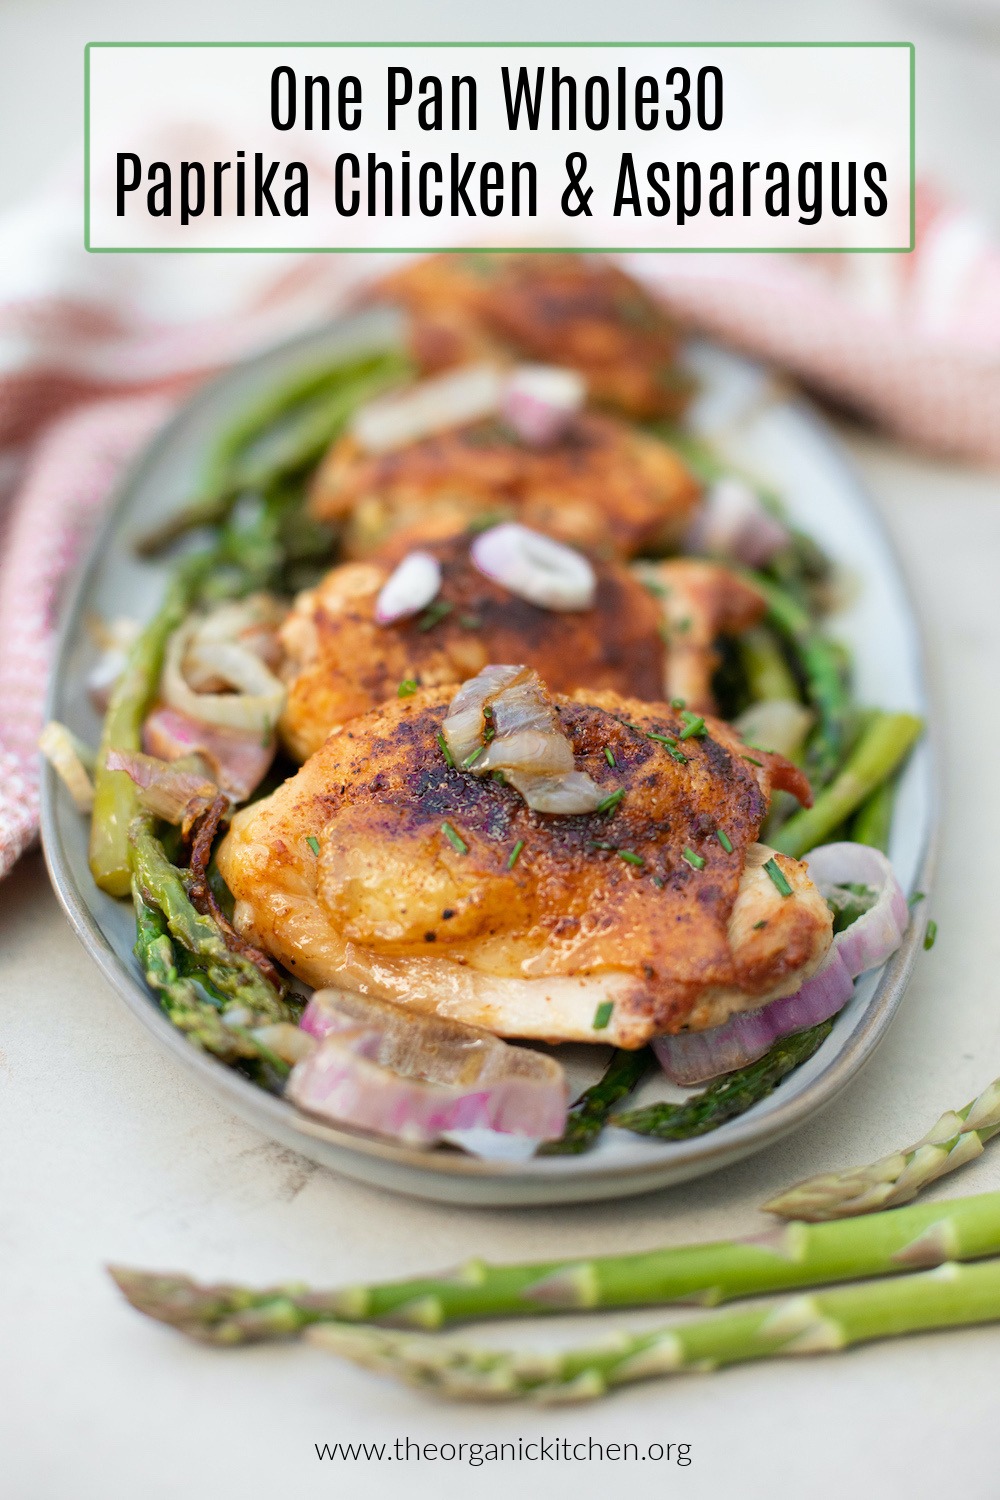 Whole30 One Pan Paprika Chicken and Asparagus garnishes with onions on a gray platter 